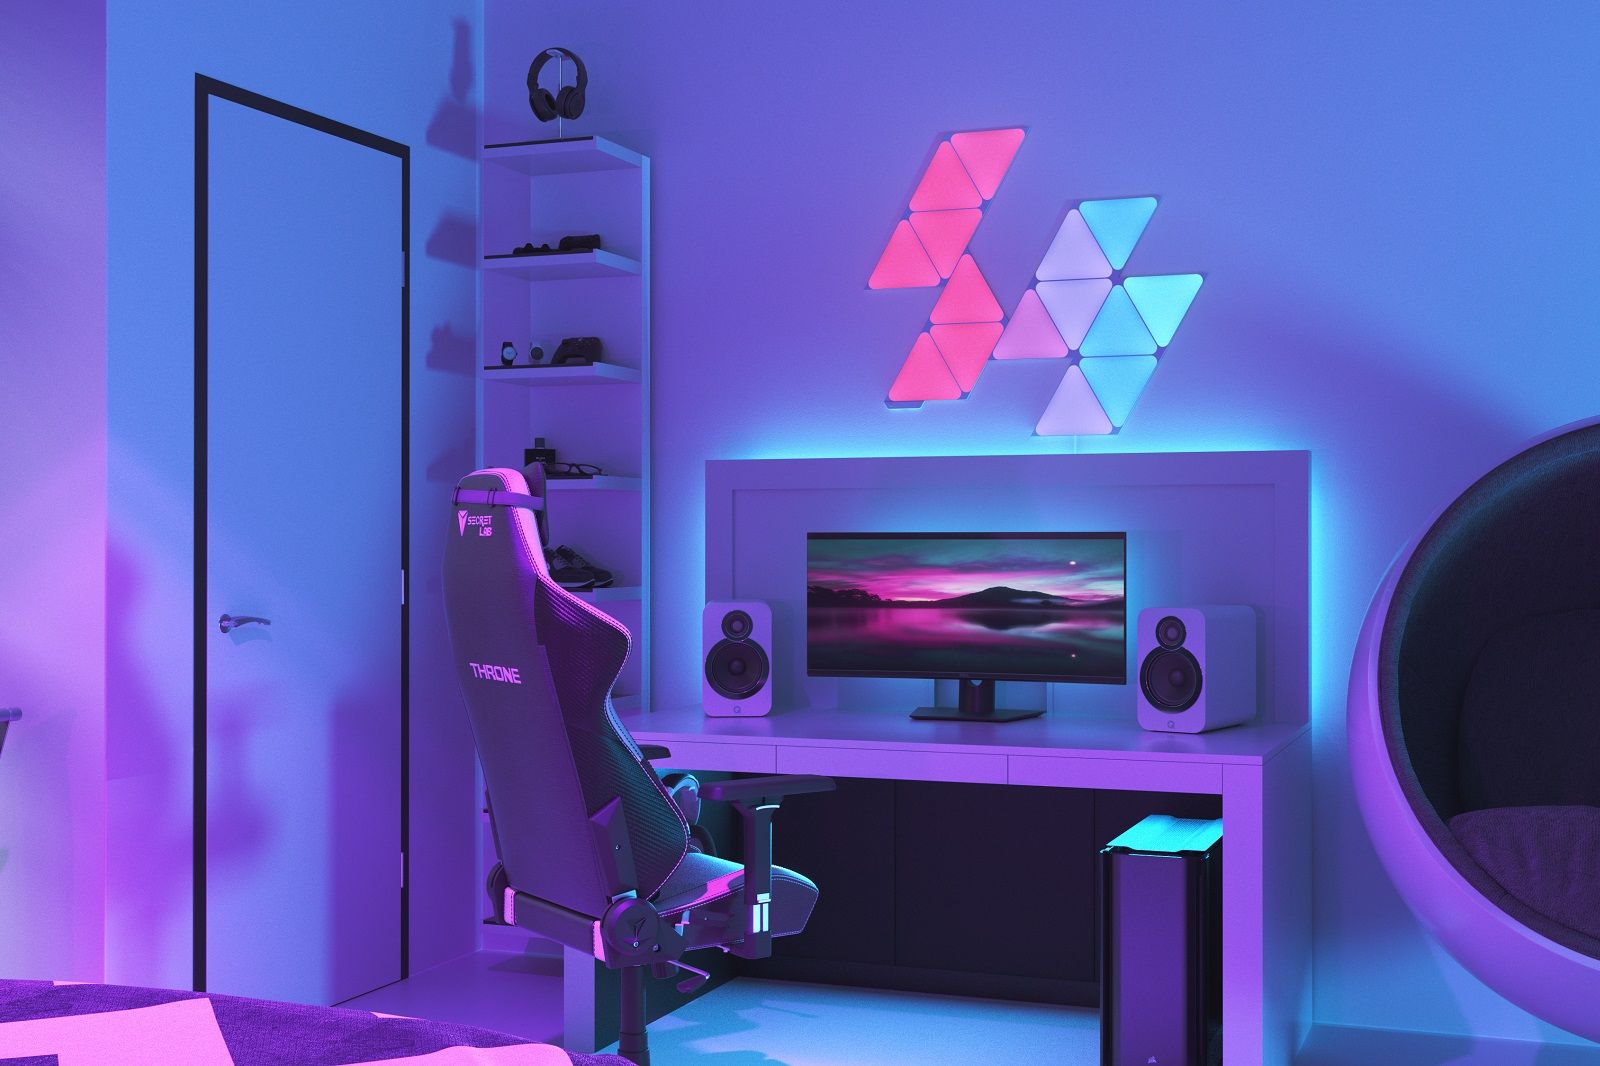 Nanoleaf now comes with even more shapes - triangles and mini triangles photo 2